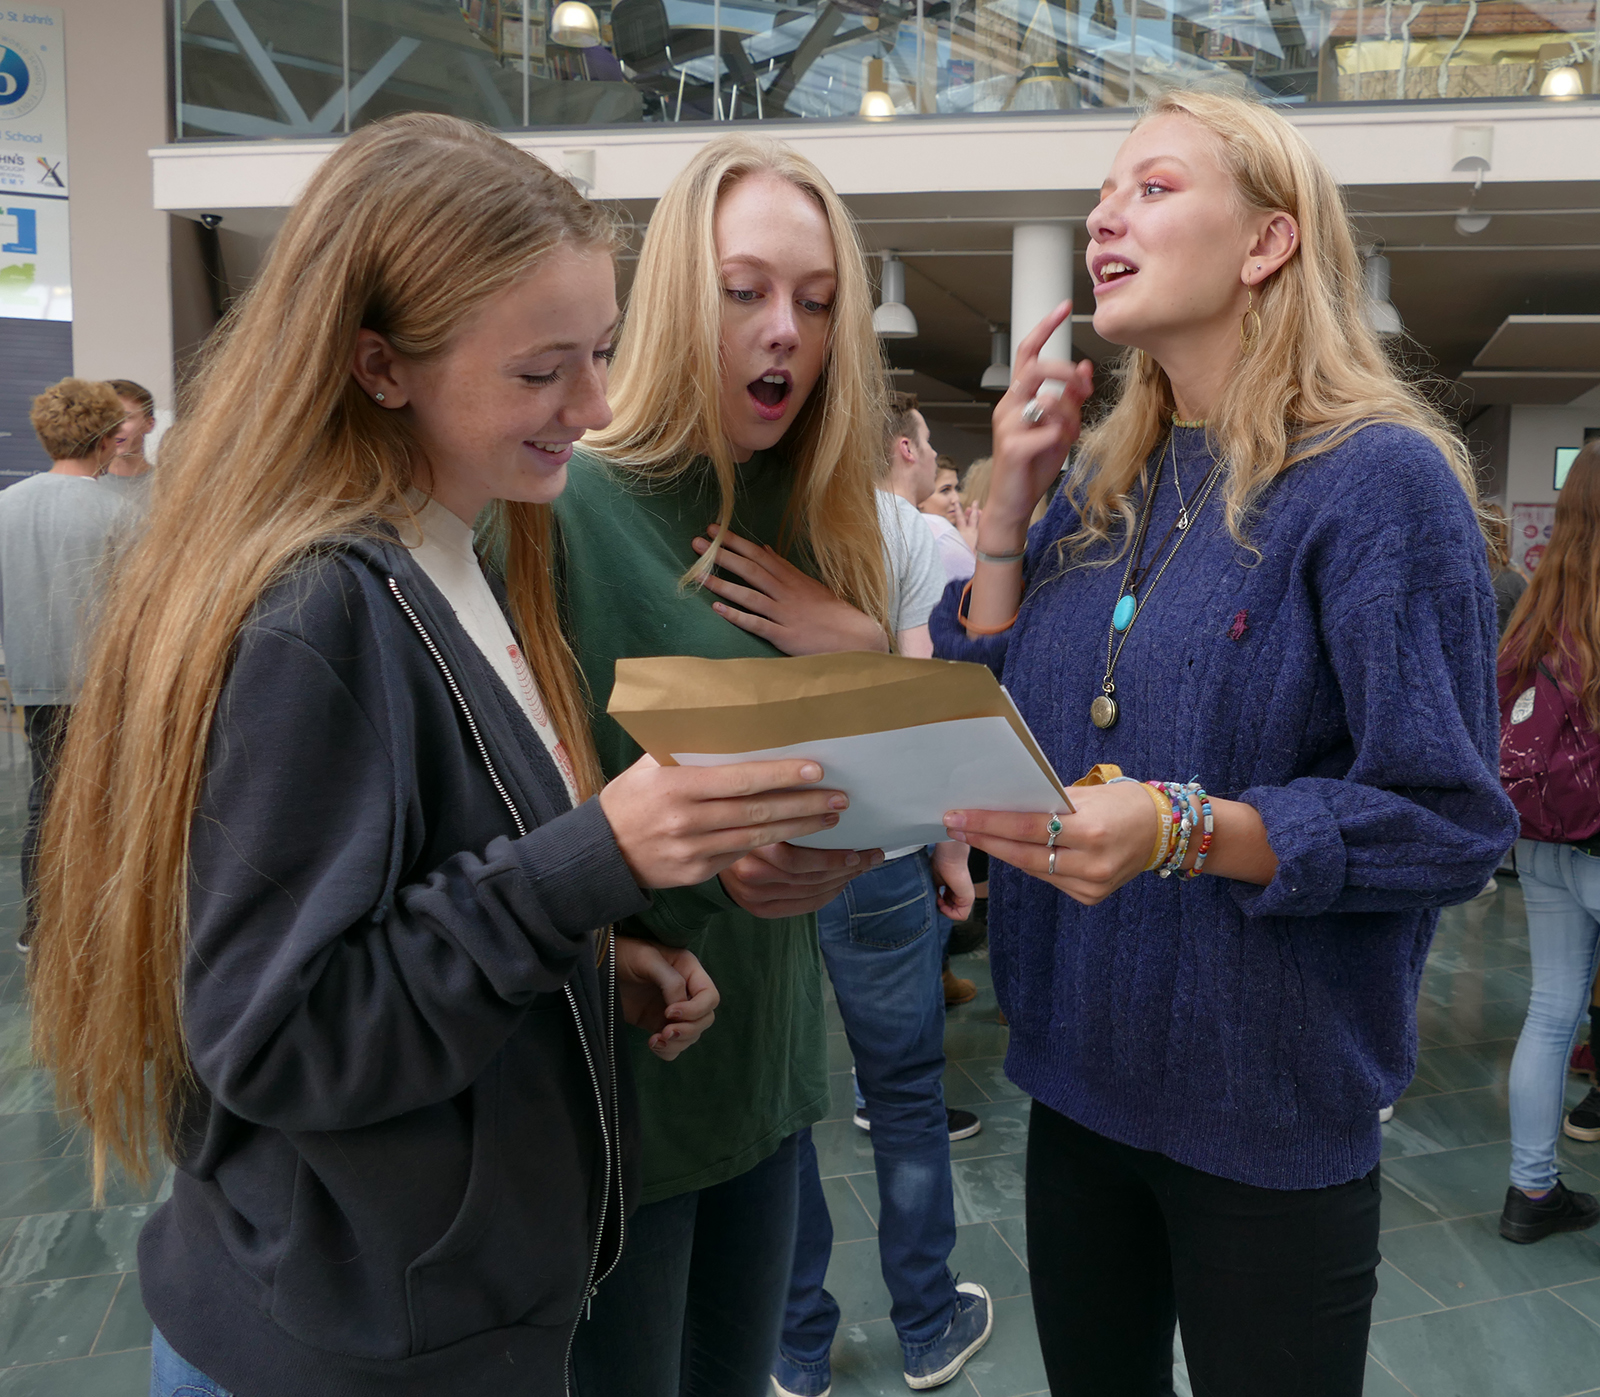 St John's student Natasha Ashbridge opens her results 9A*, 1A, 9,9, 8 with friends Katie Mcque and Ellie Dunn